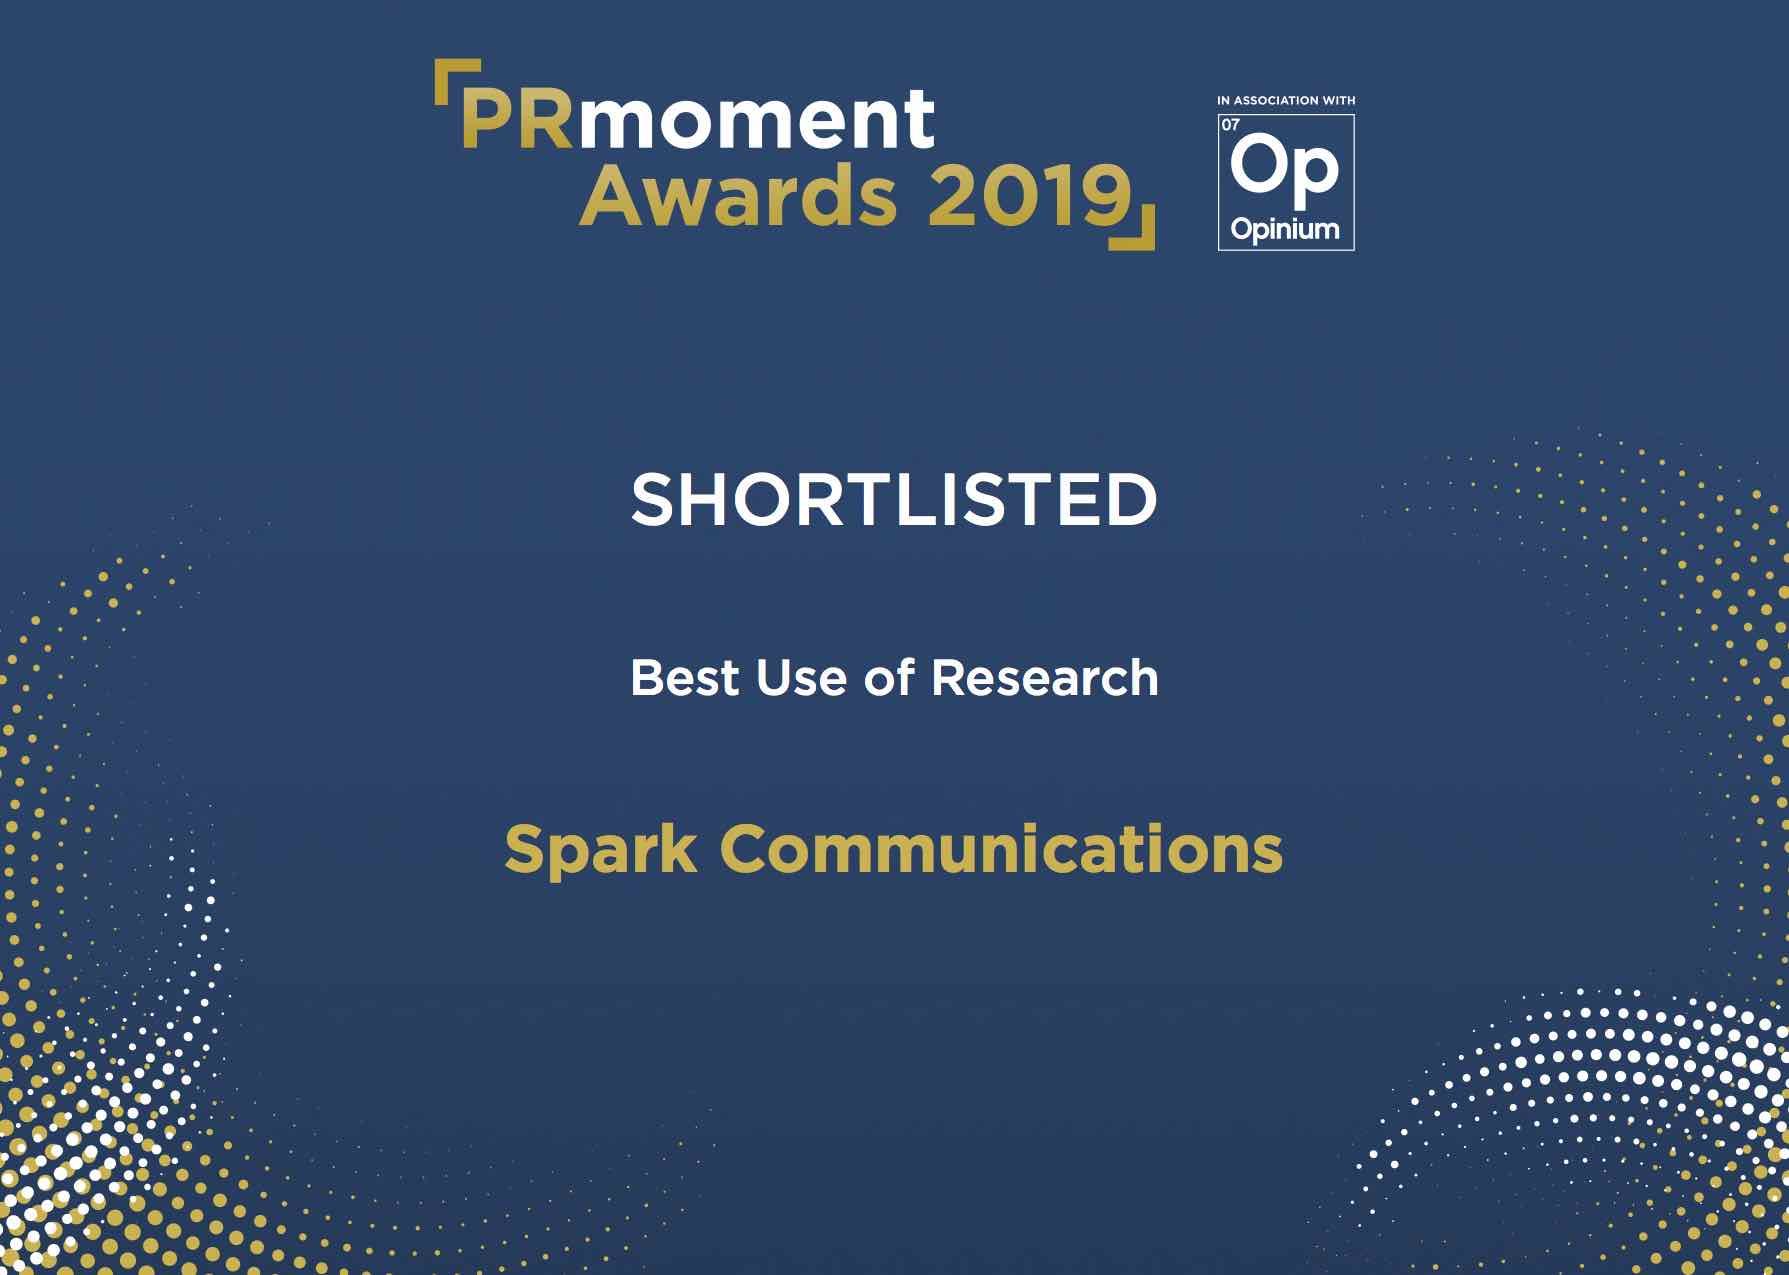 Shortlisted in the PRmoment Awards 2019